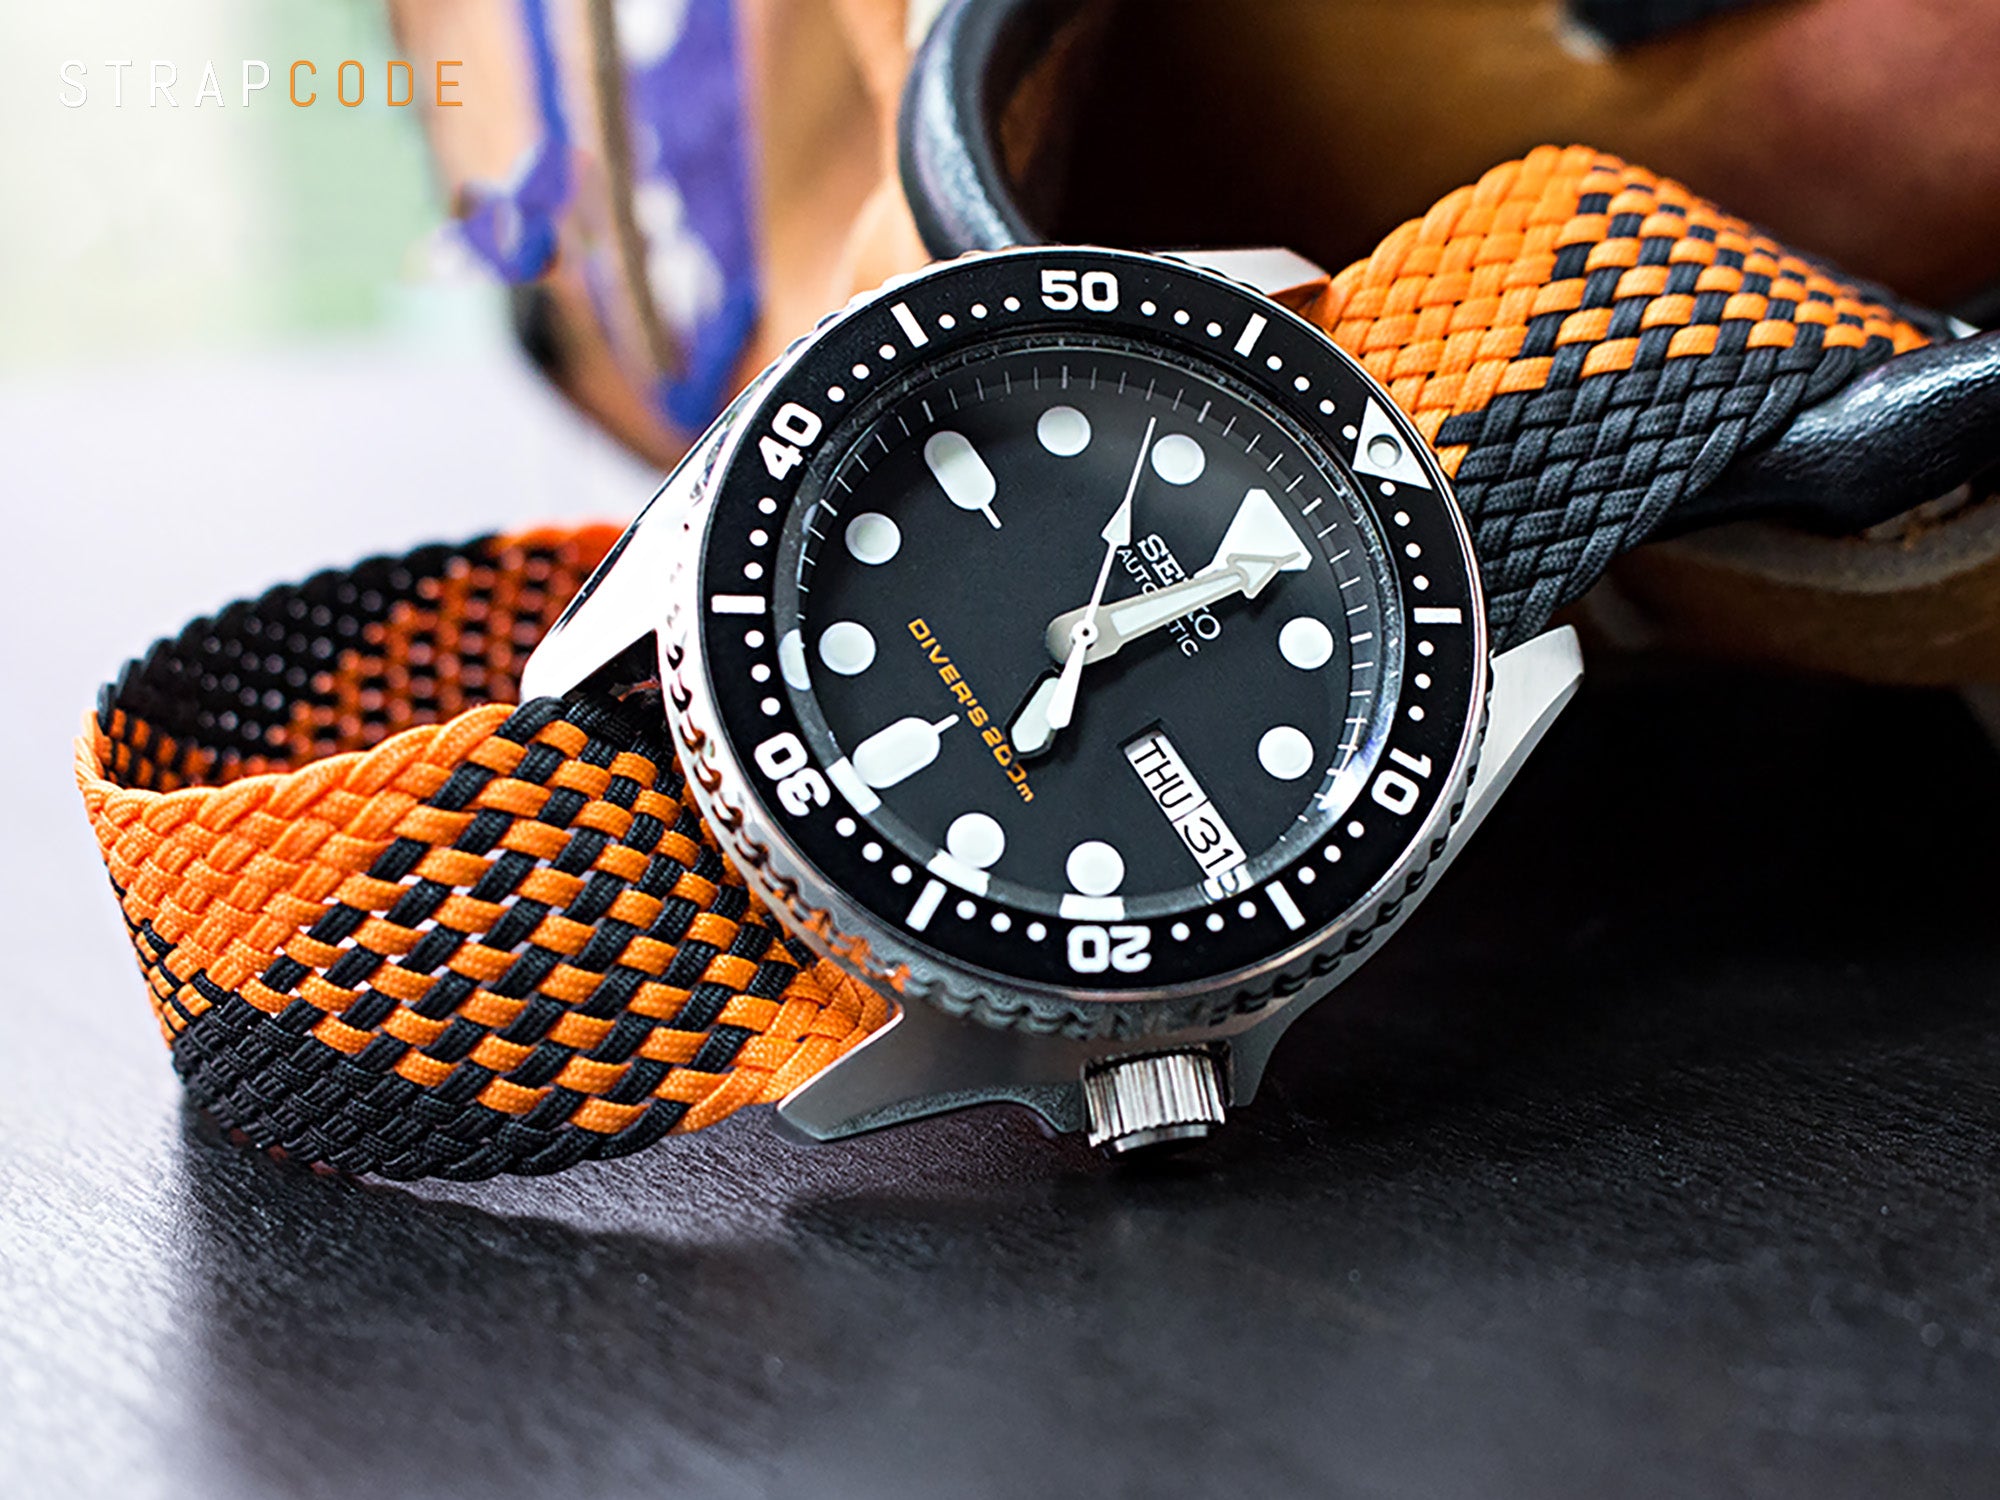 20mm MiLTAT Perlon Watch Strap in Black and Orange on Seiko Diver SKX013 by Strapcode watch bands